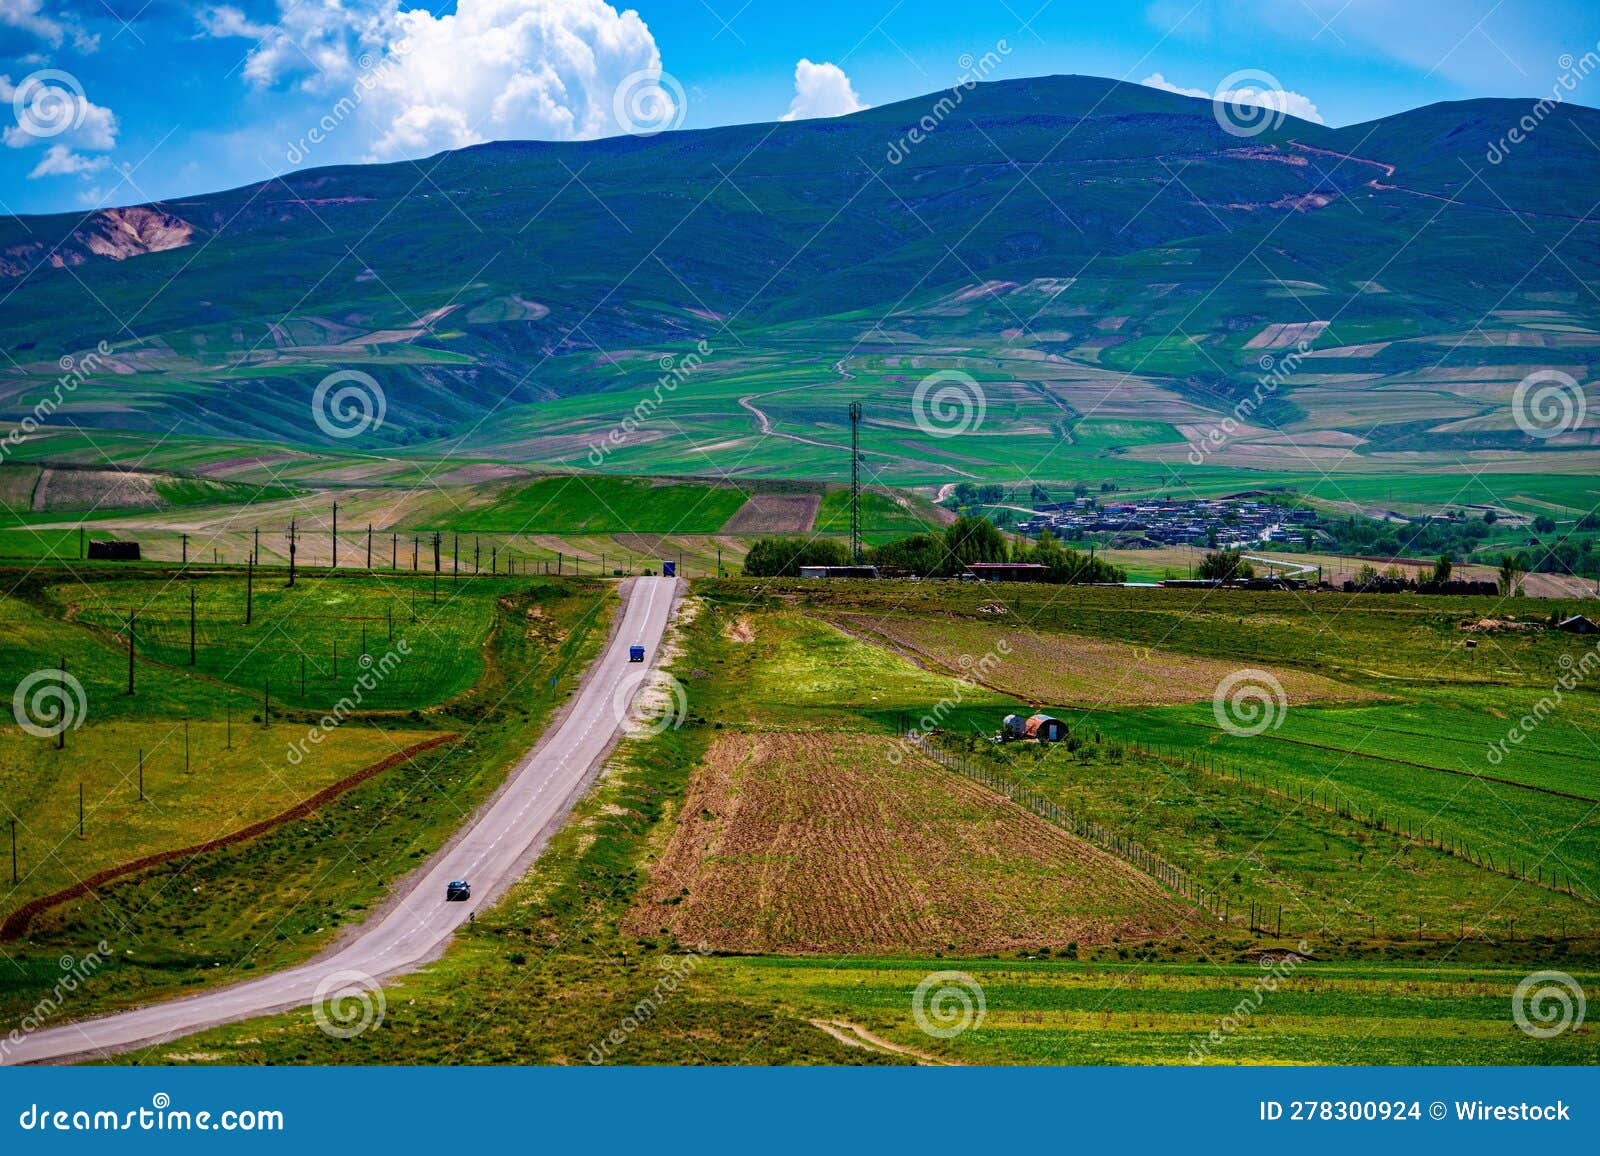 idyllic rural landscape against a vibrant blue sky in town of takab, west azerbaijan province, iran